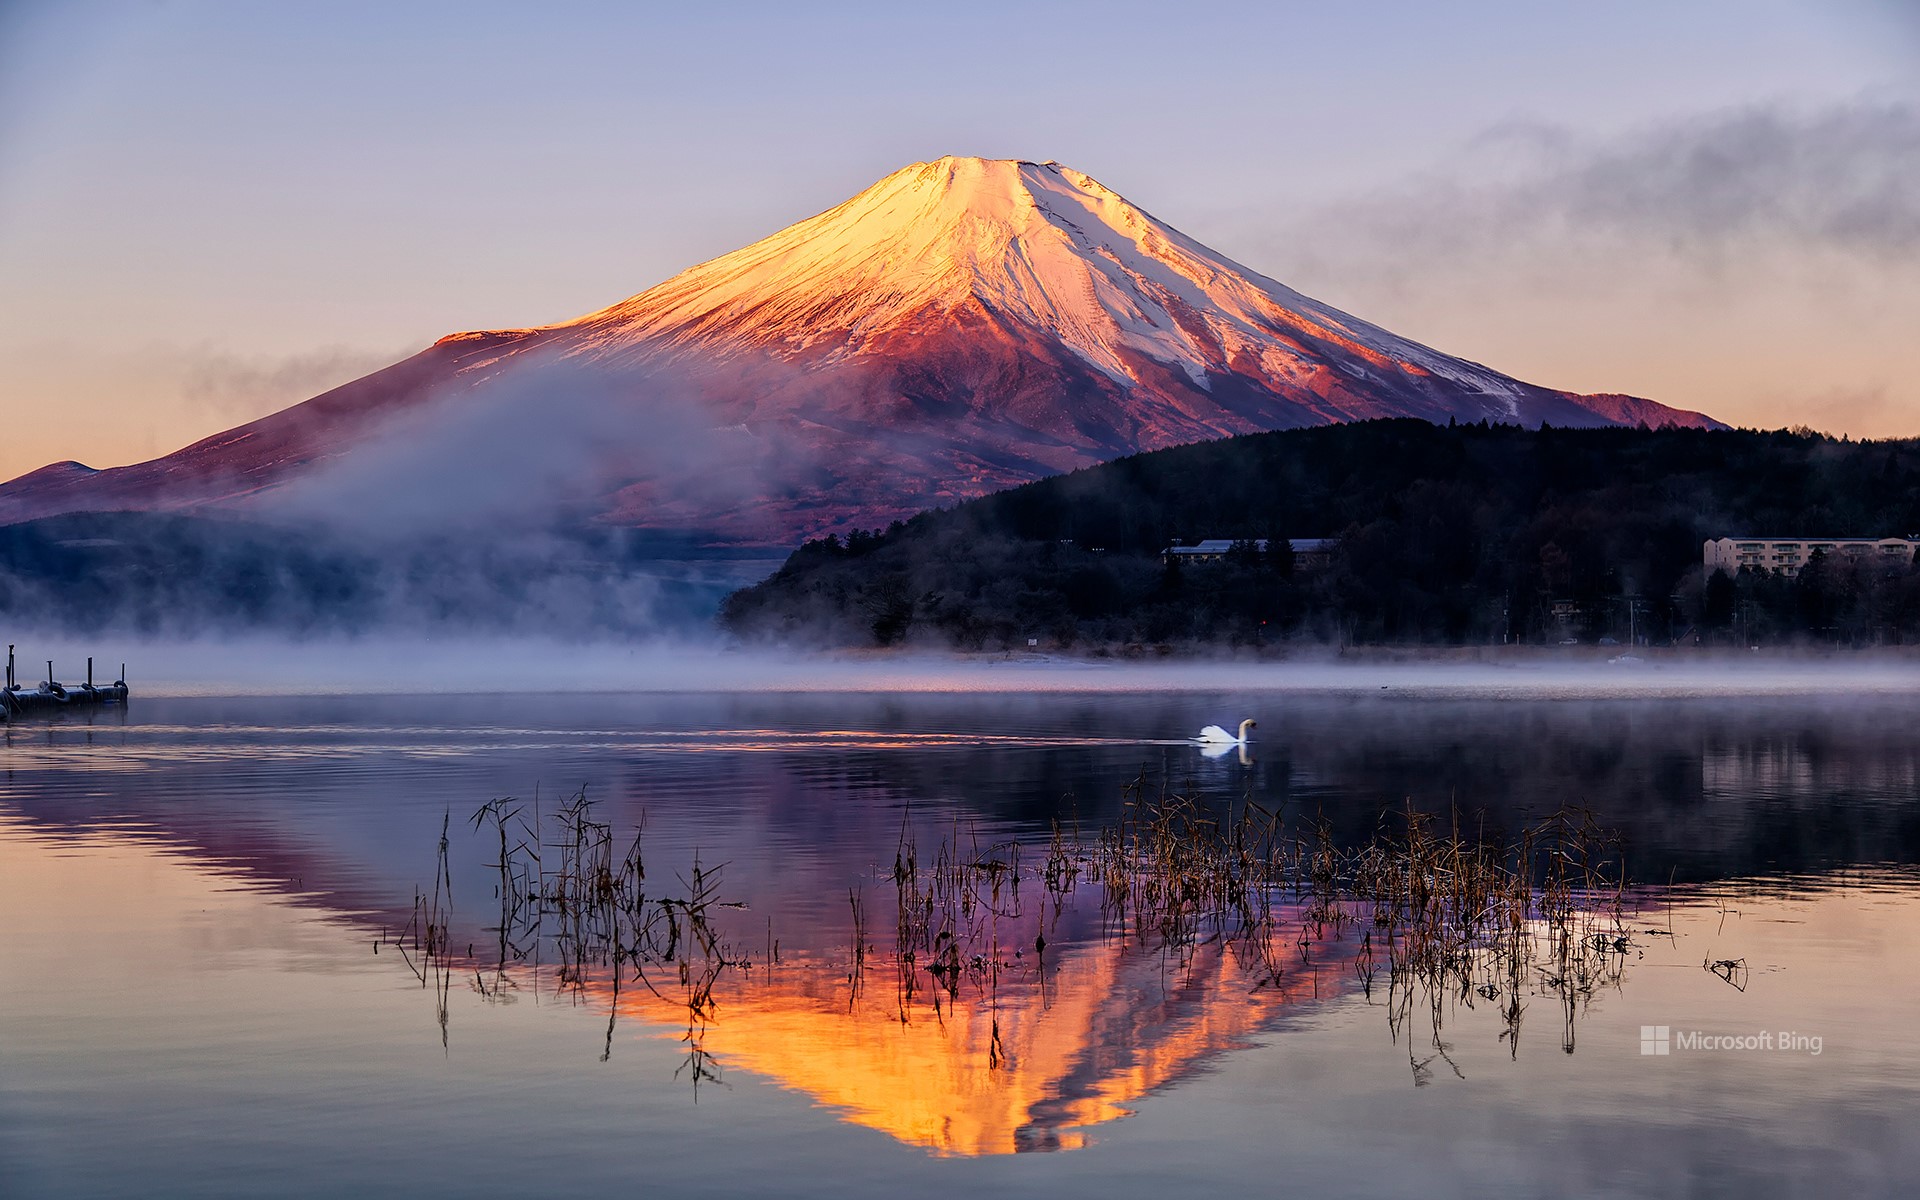 Red Mt.Fuji reflected on the surface of the water, Yamanashi